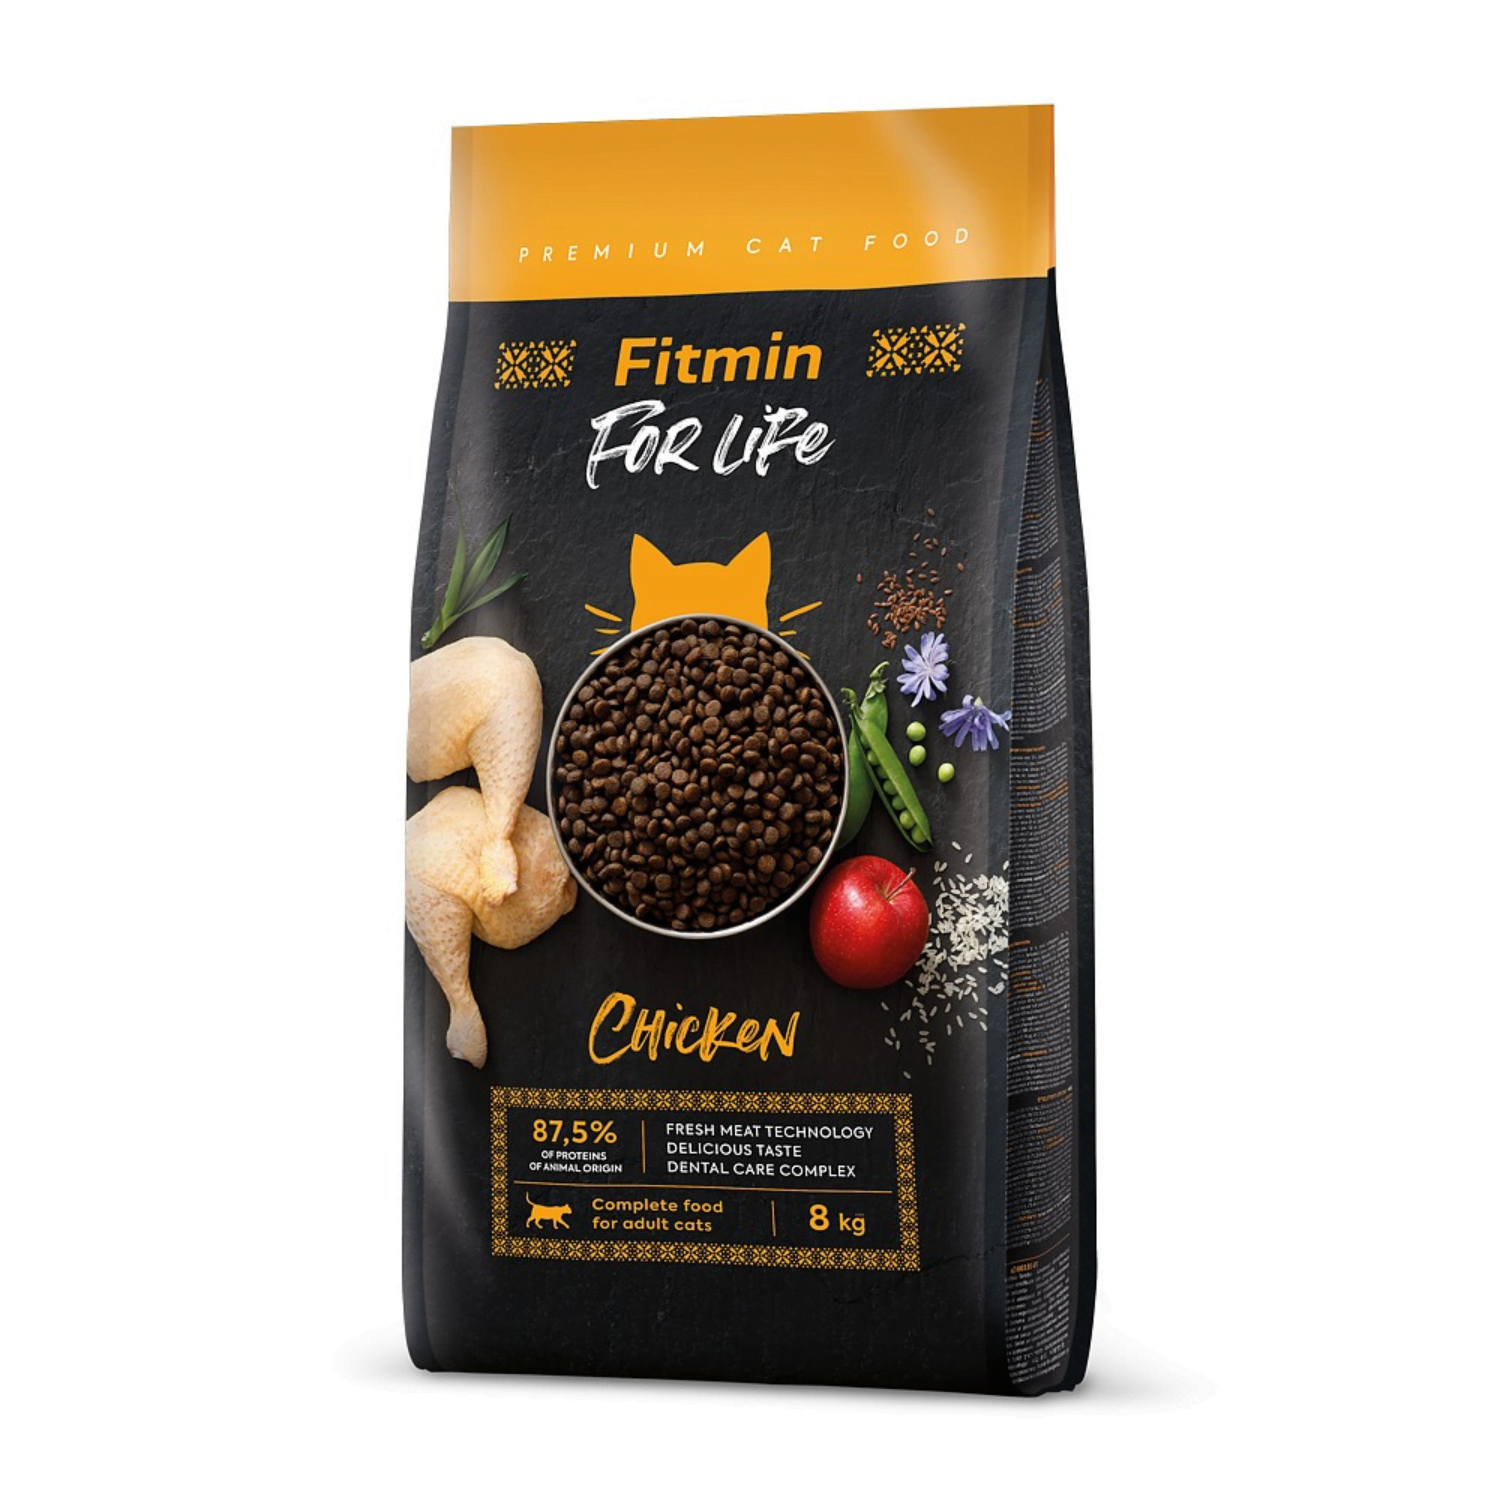 Fitmin cat For Life Adult Chicken - 8kg, 8595237032051